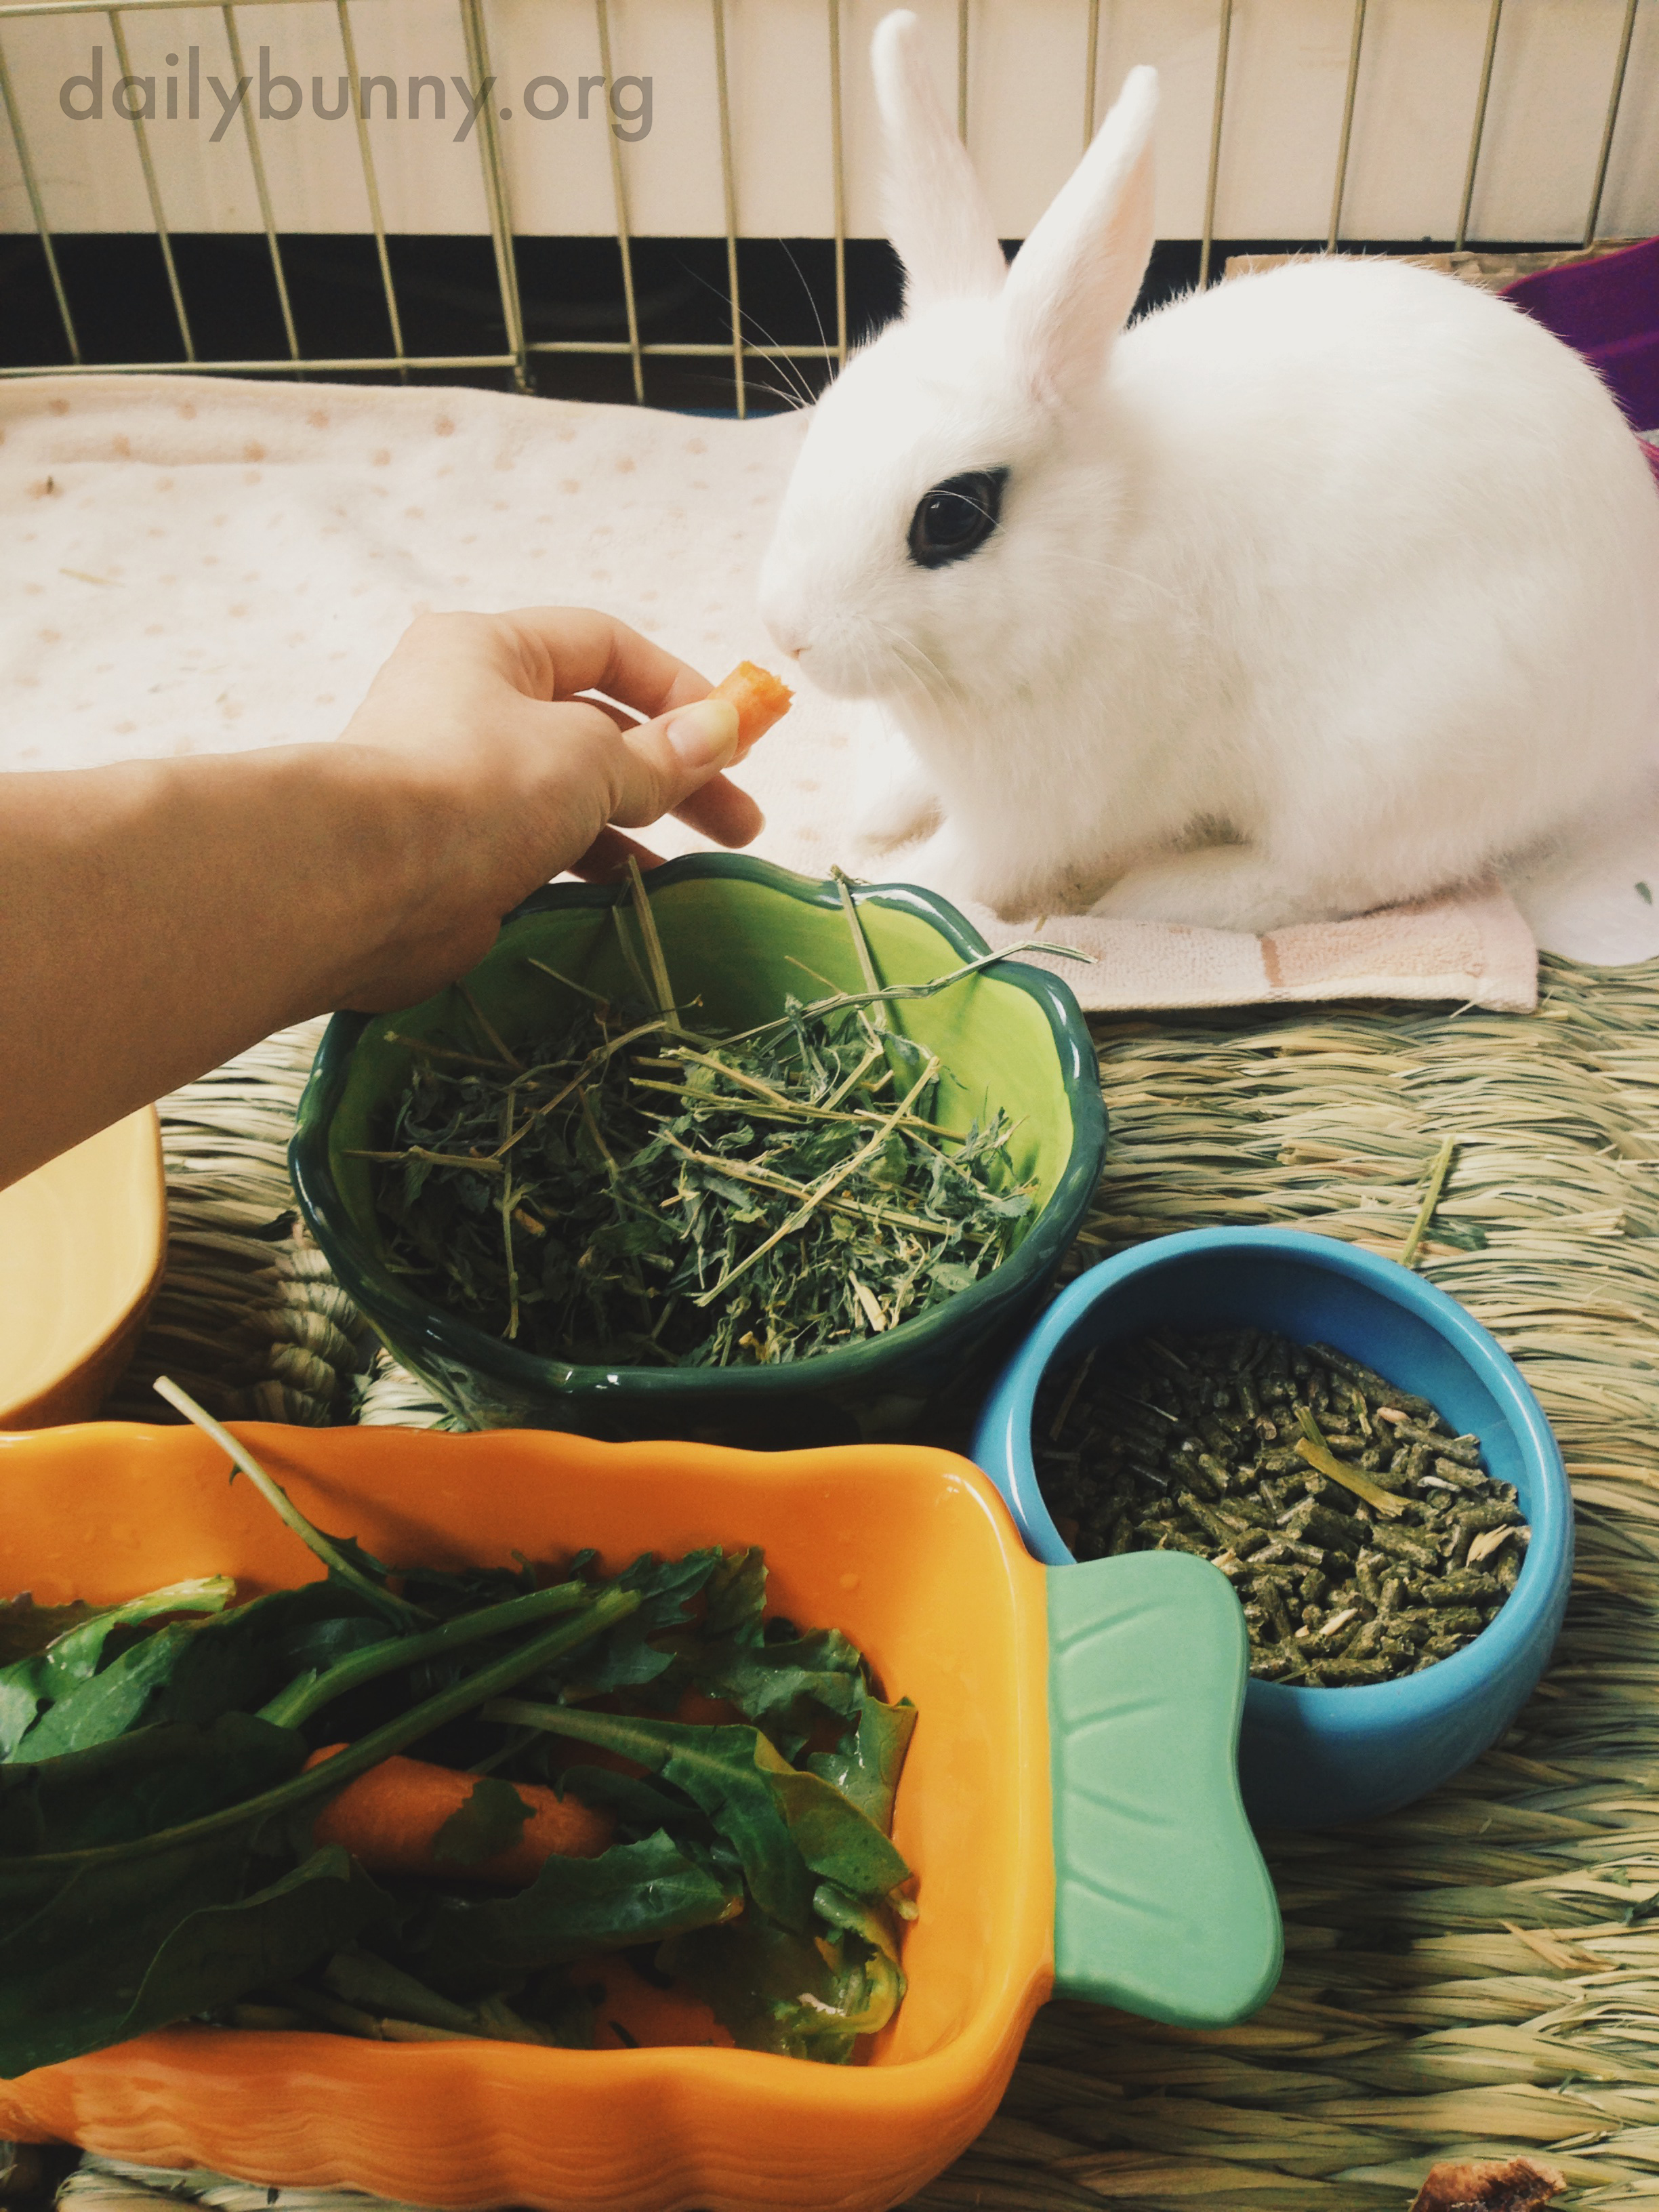 Bunny Tastes Vegetables for the First Time